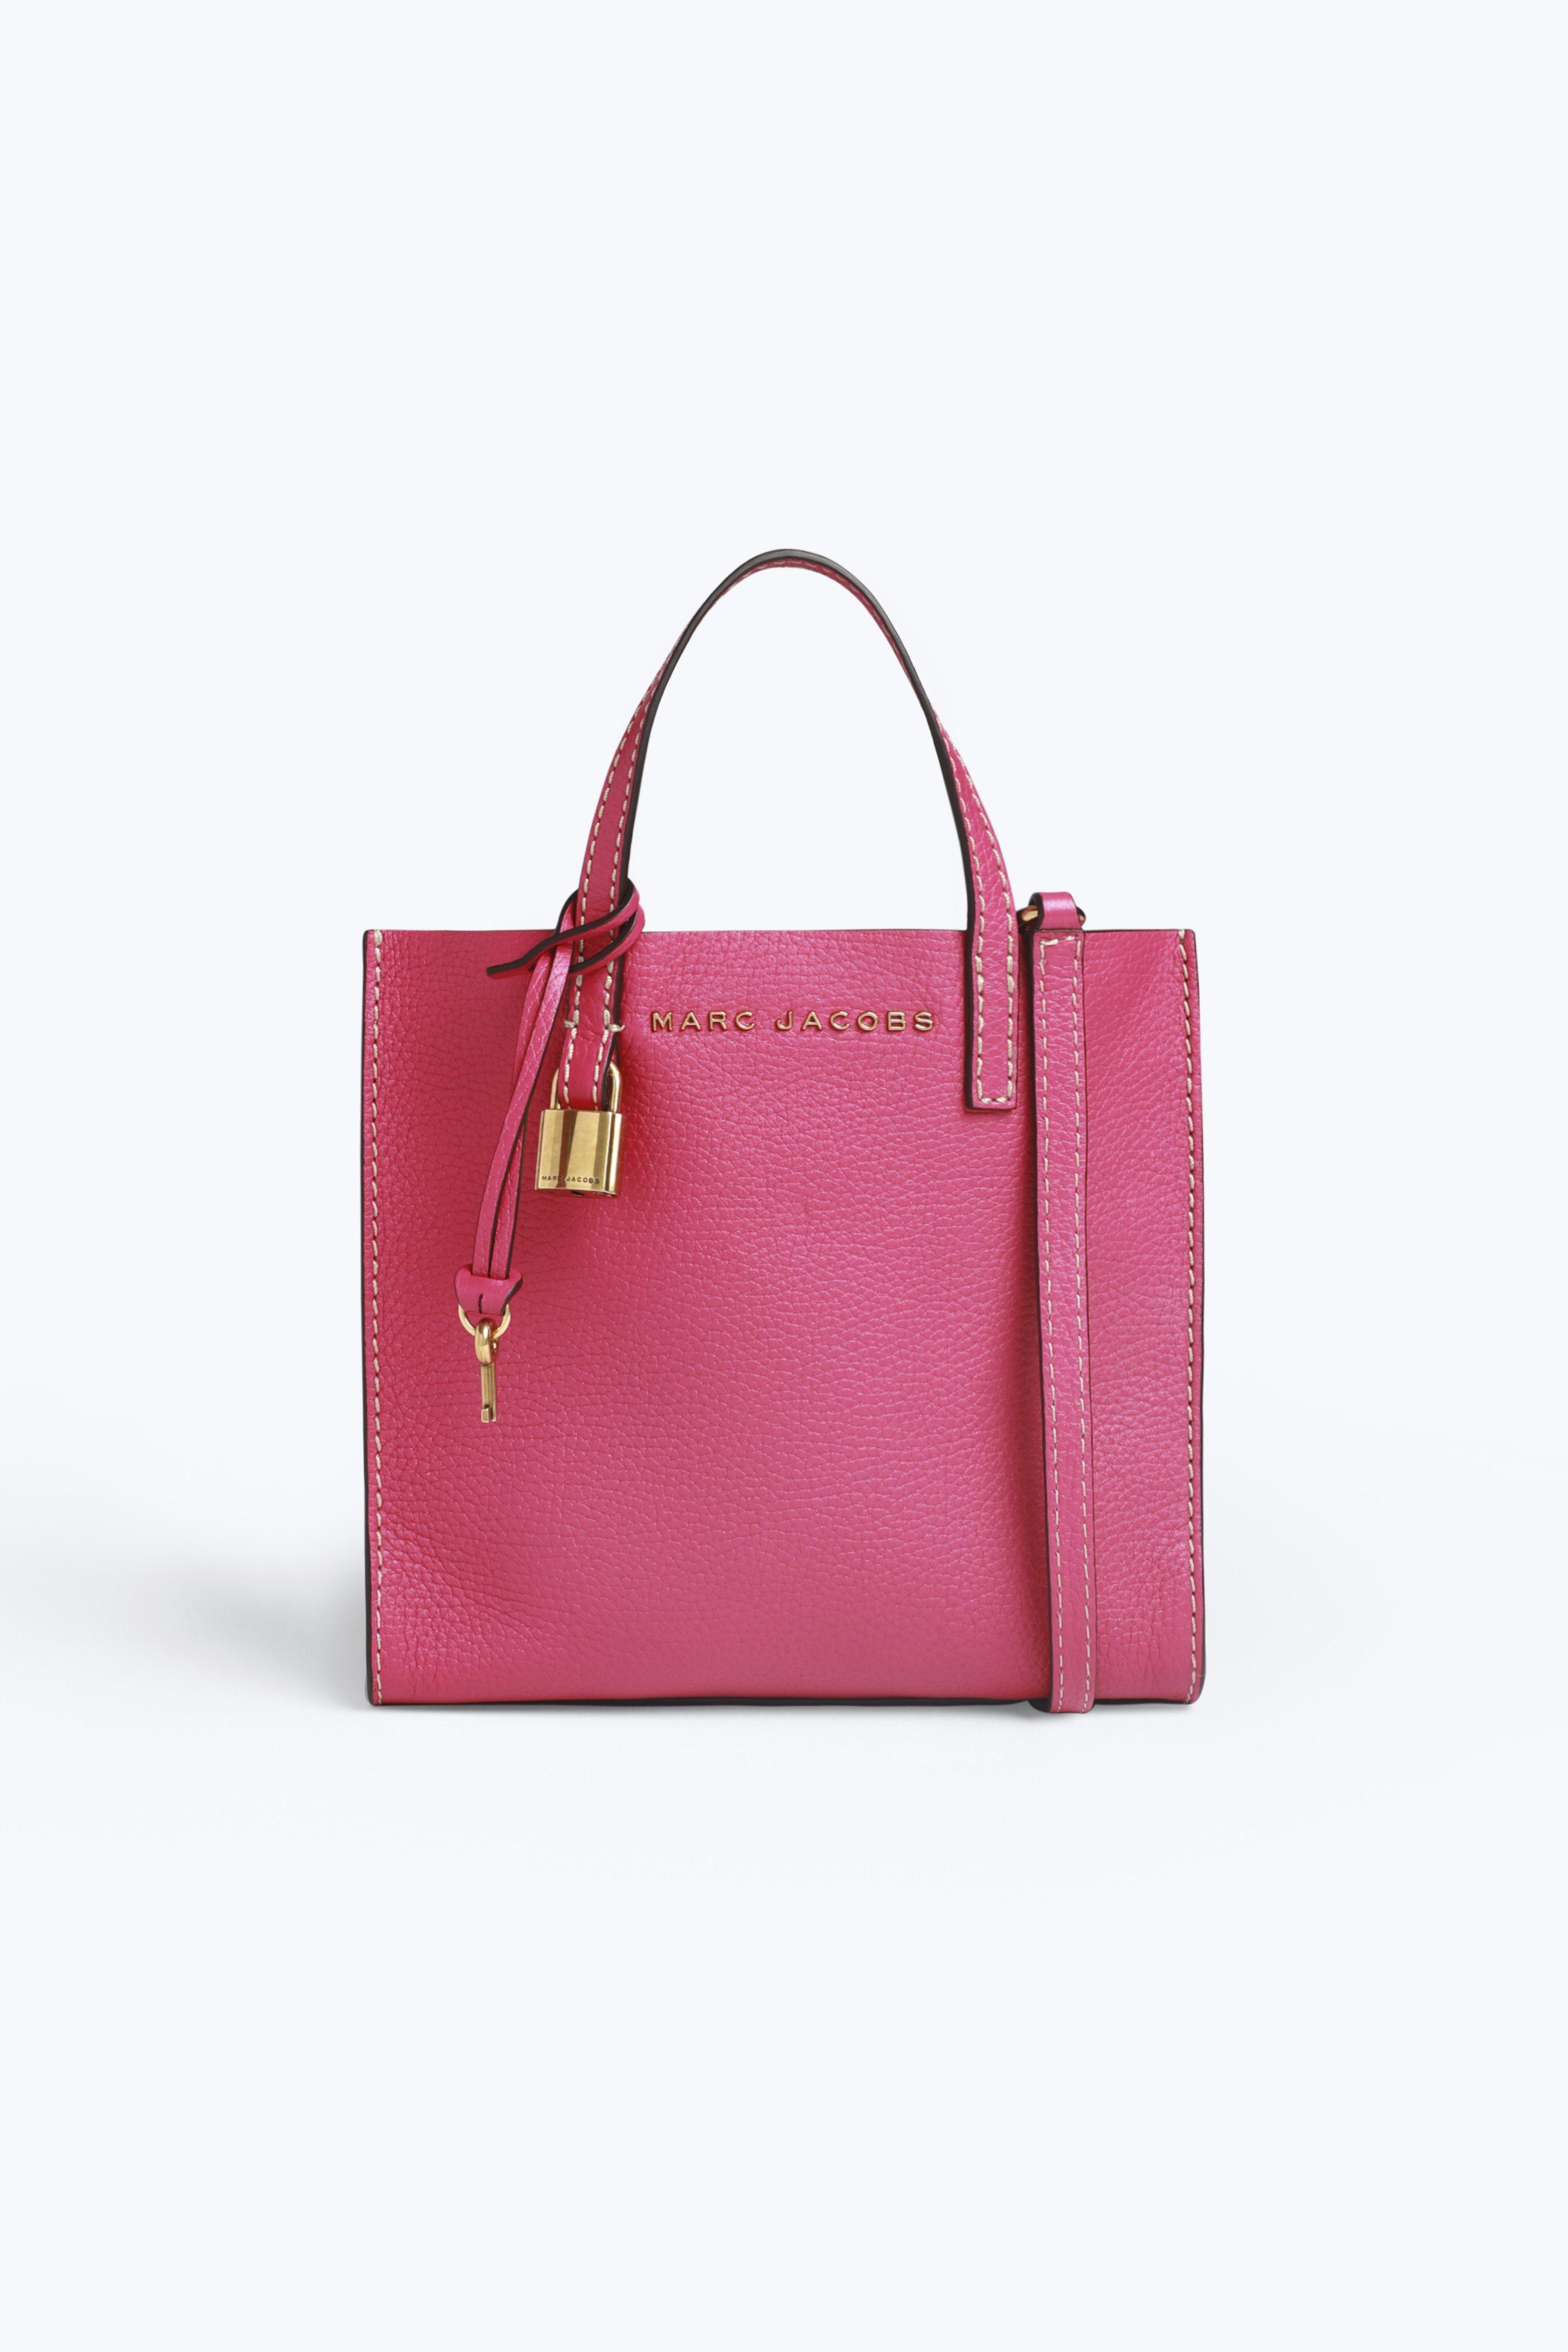 Marc jacobs The Mini Grind Bag in Pink | Lyst